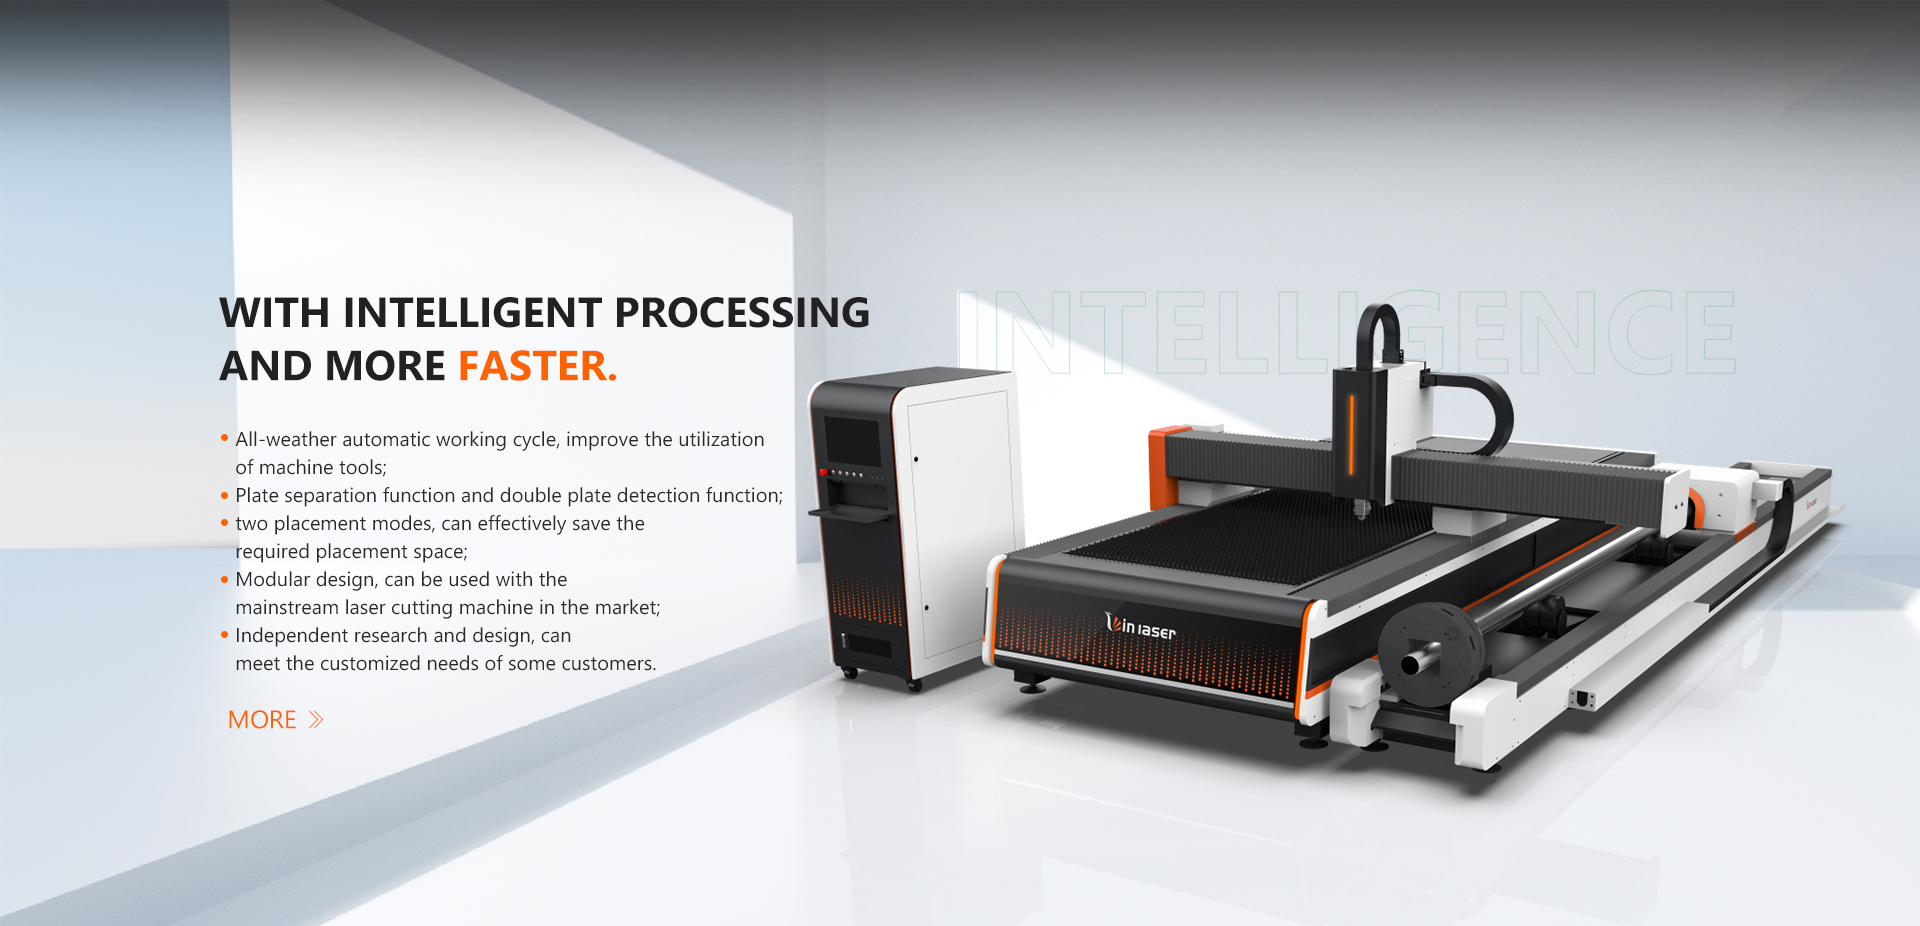 Blade Cleaner, Cnc Router, Co2 Laser Cutting&Engraving Machine - Lin Laser